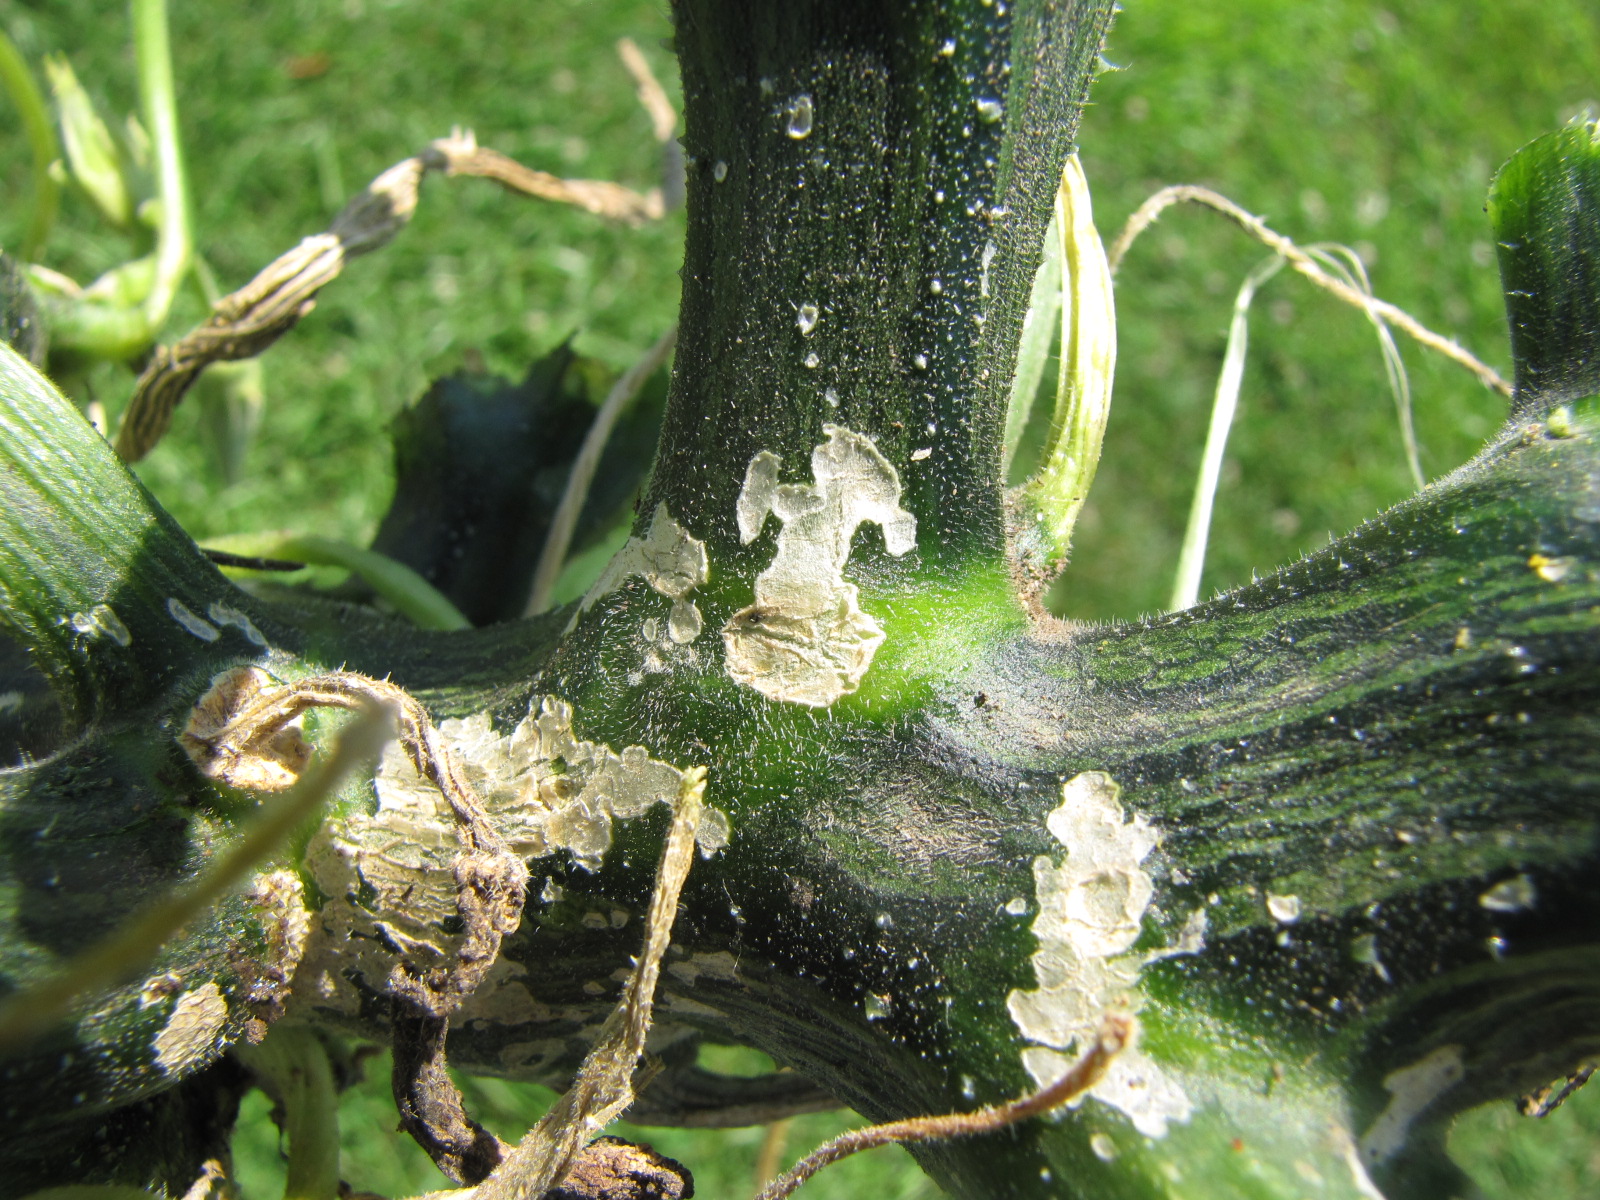  Cucumber beetle feeding on squash. Cucumber beetle feeding is associated with bacterial wilt.